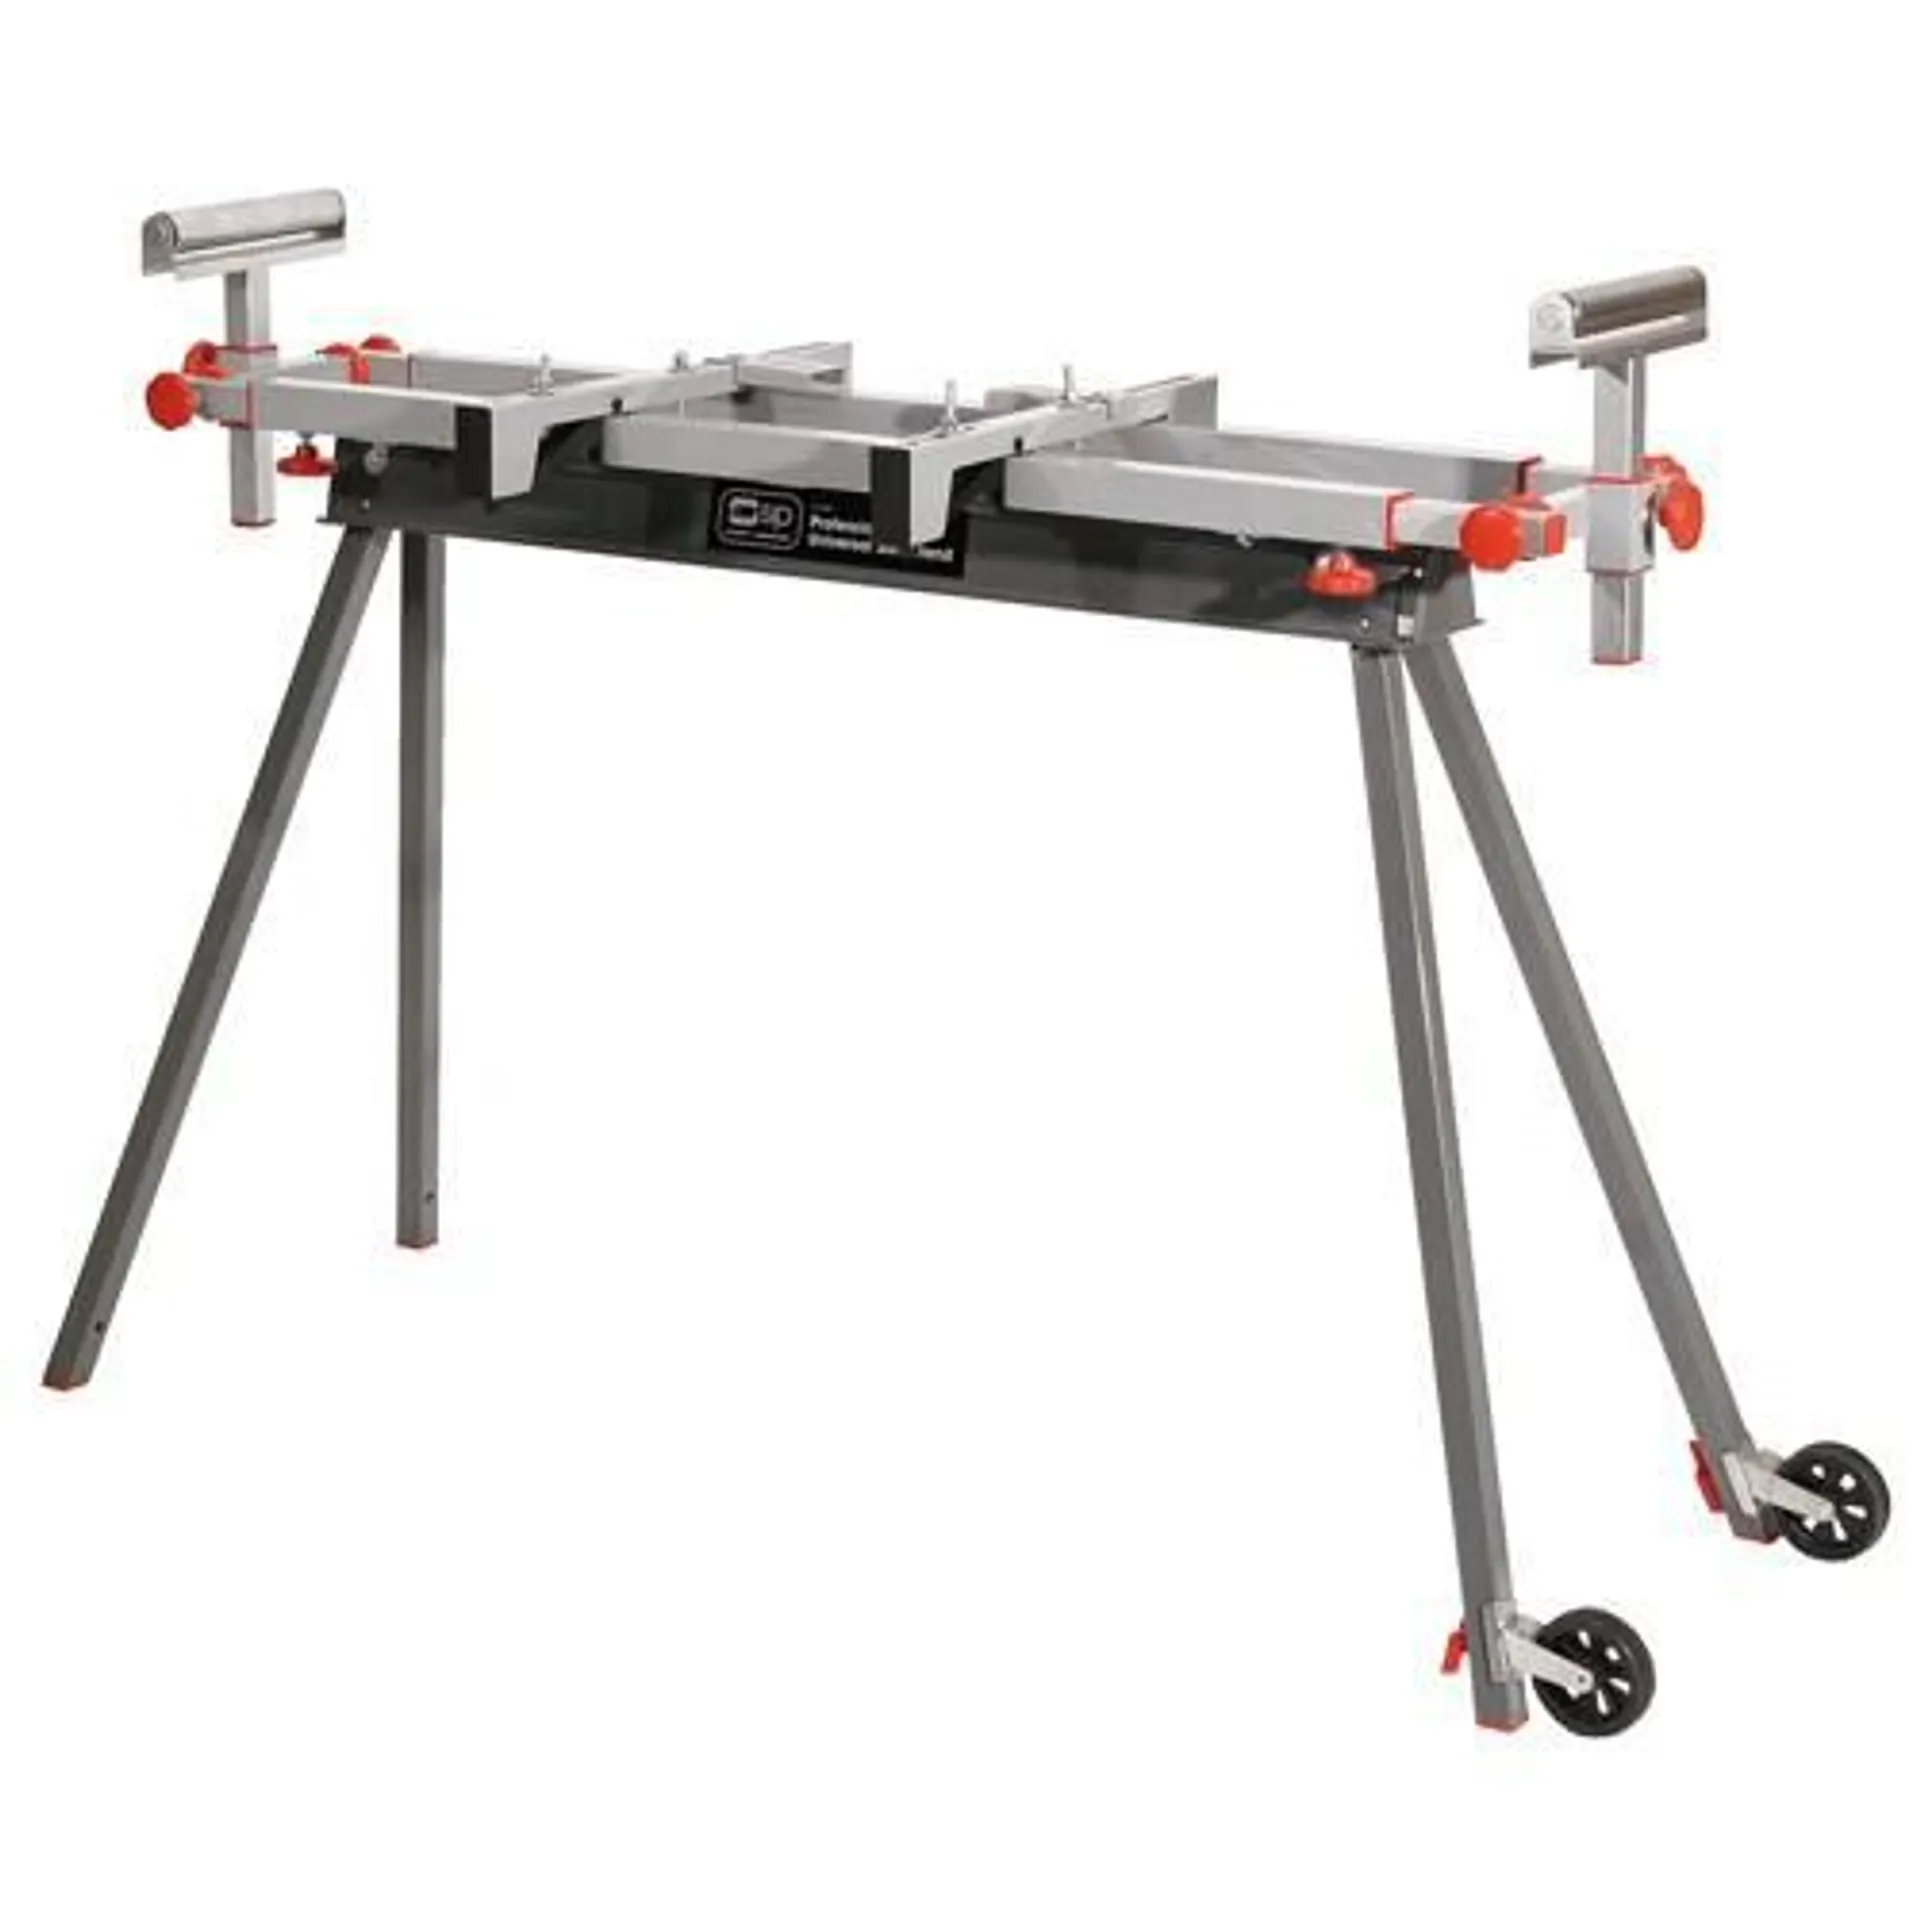 01958 Professional Universal Mitre Saw Stand